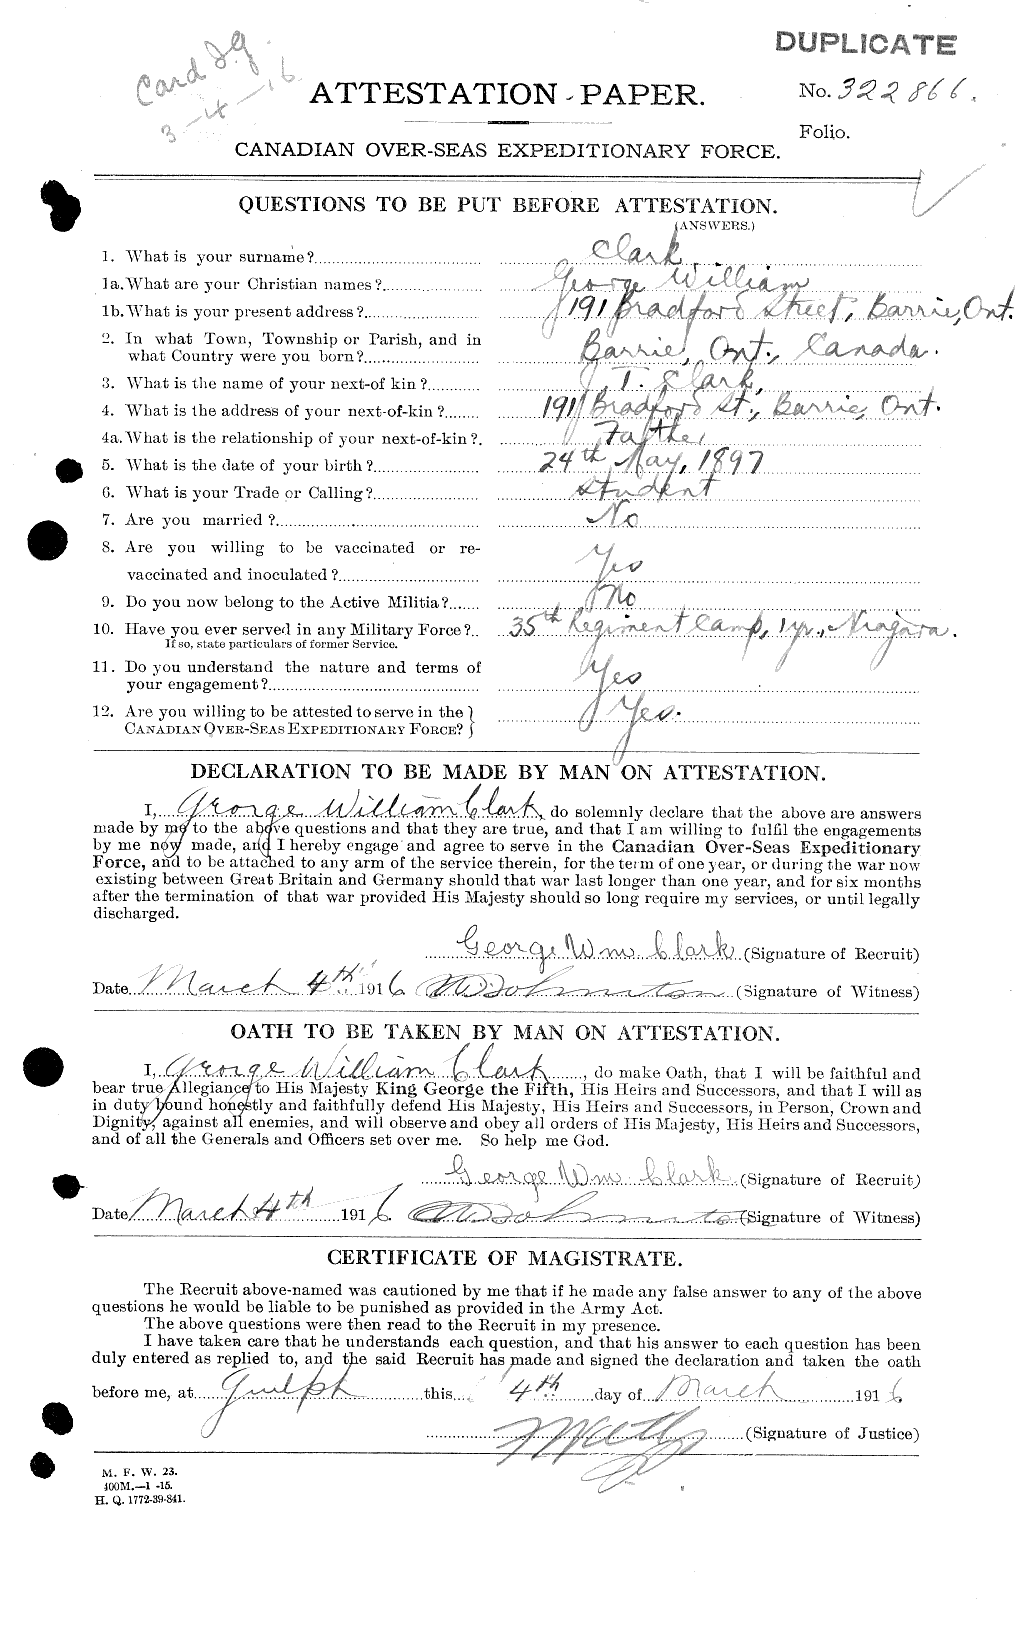 Personnel Records of the First World War - CEF 023209a